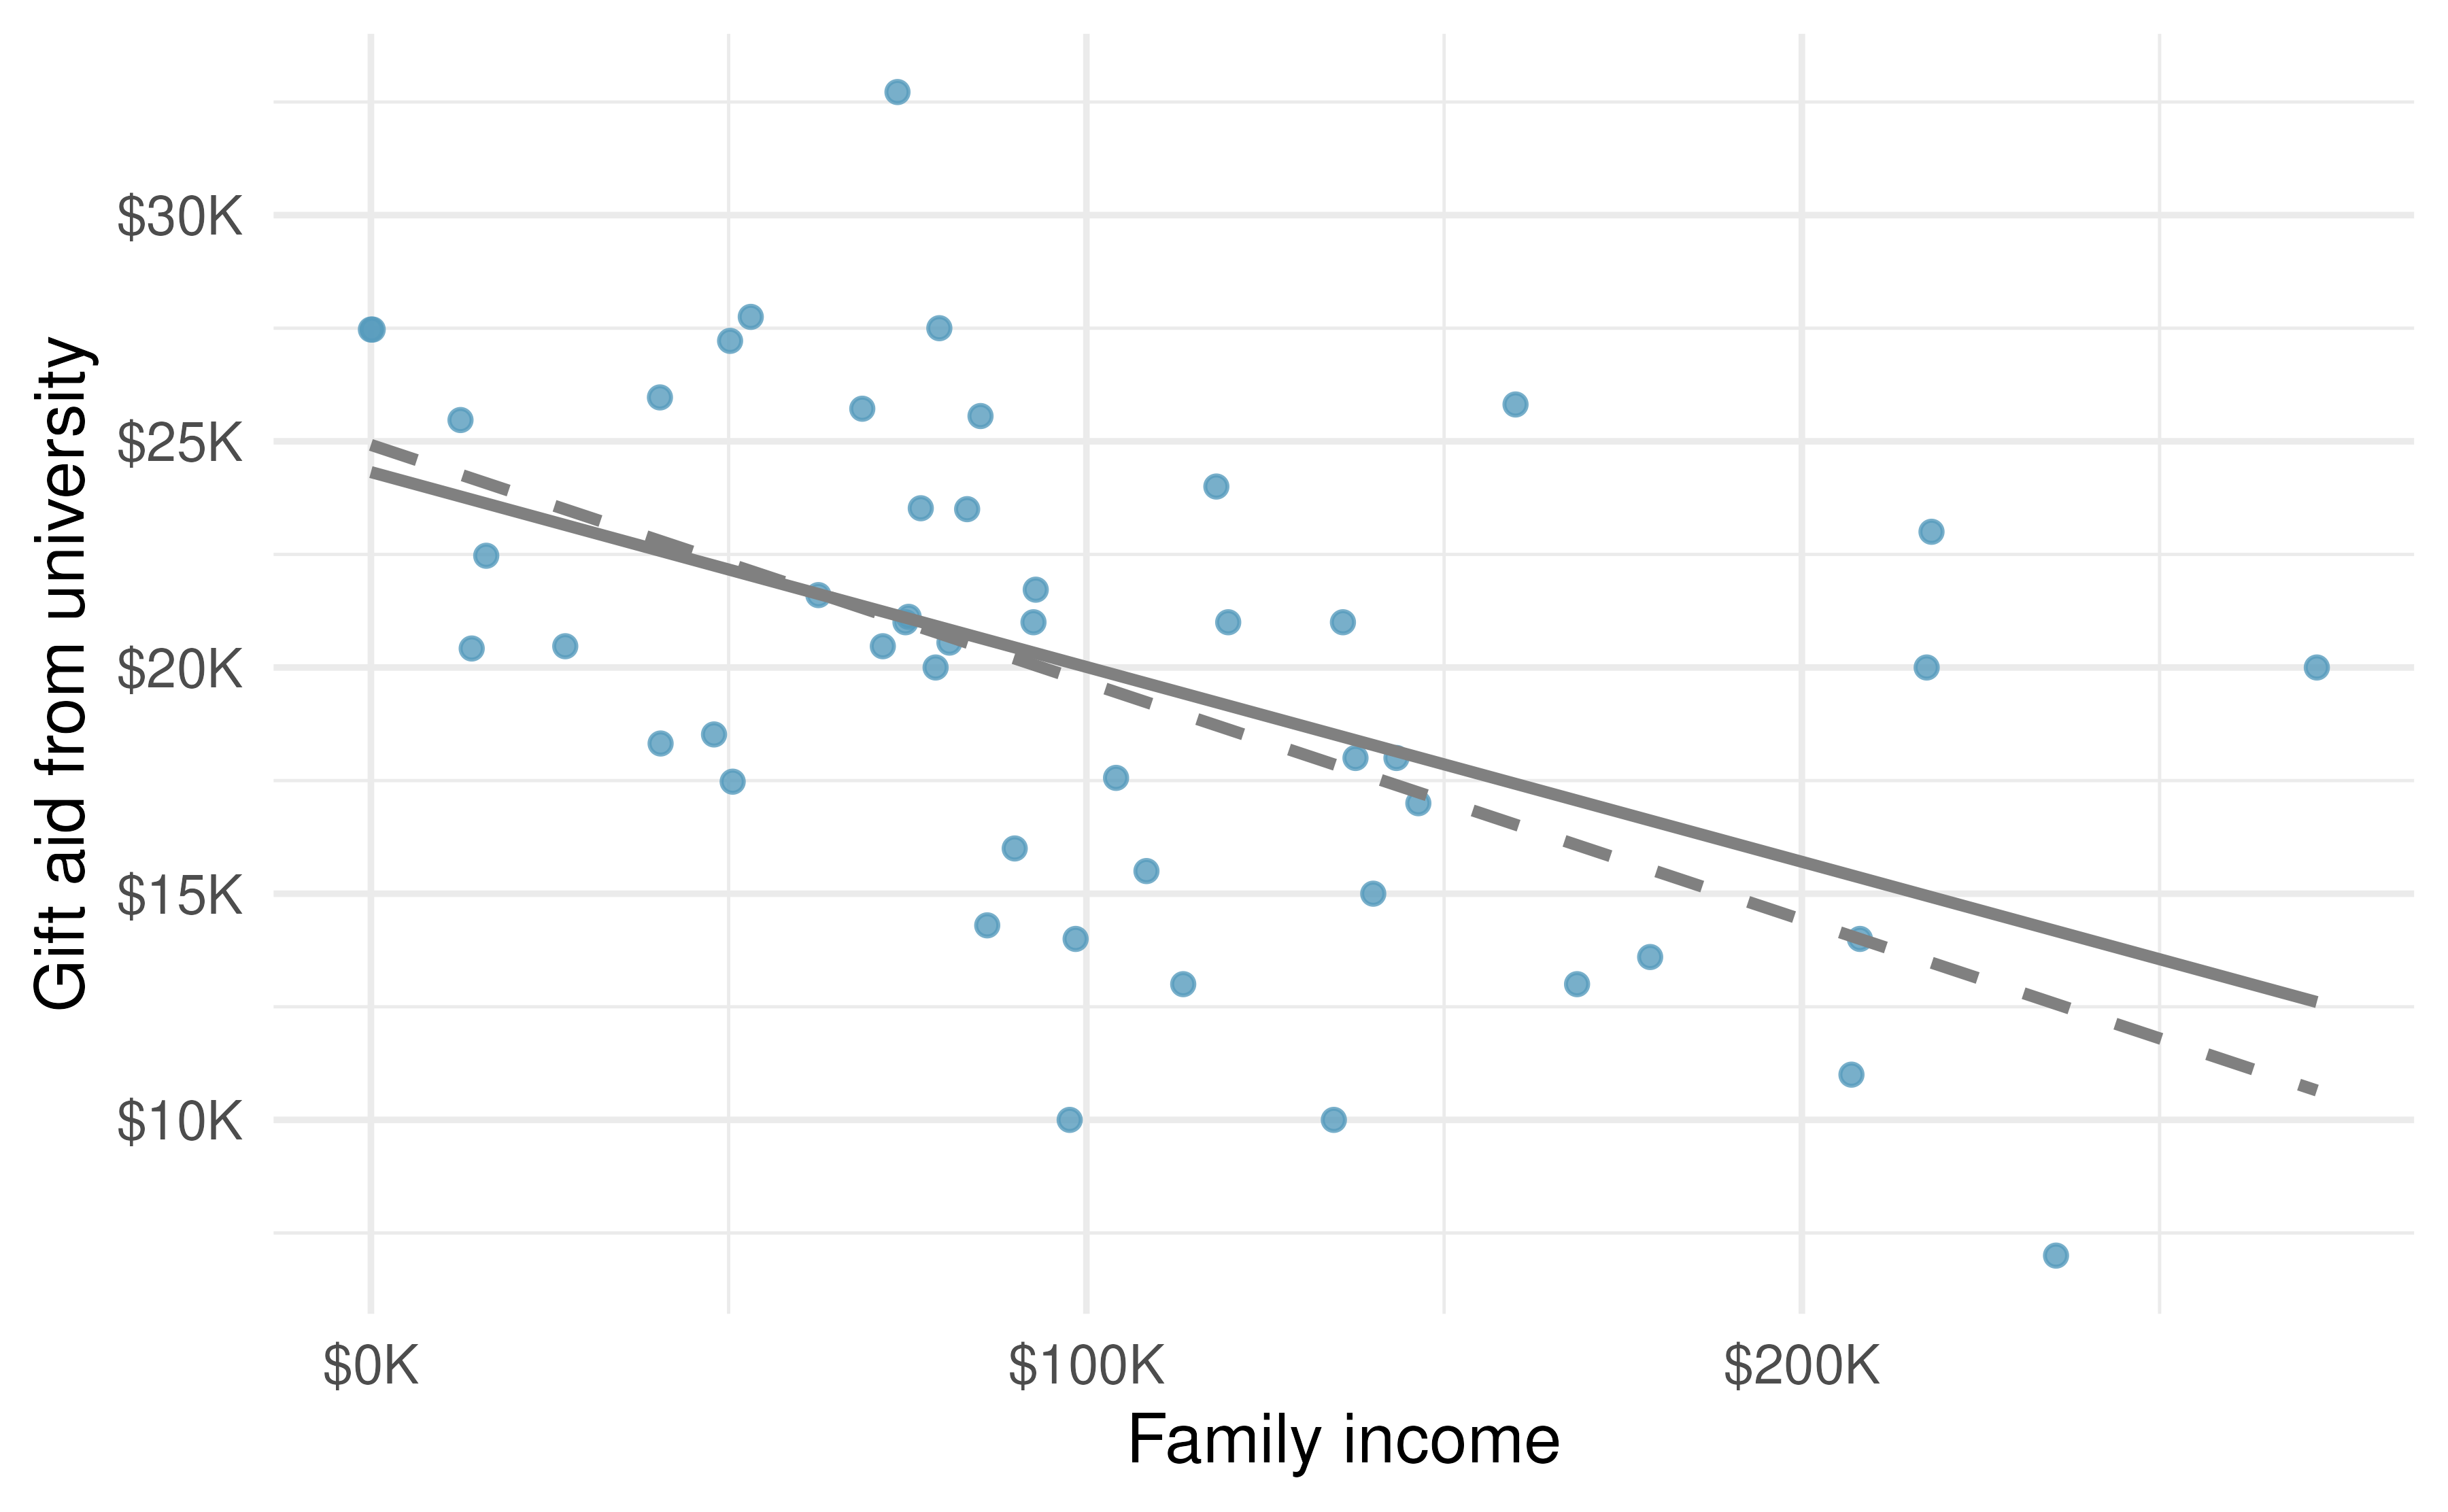 Gift aid and family income for a random sample of 50 freshman students from Elmhurst College. The dashed line represents the line that minimizes the sum of the absolute value of residuals, the solid line represents the line that minimizes the sum of squared residuals, i.e., the least squares line.